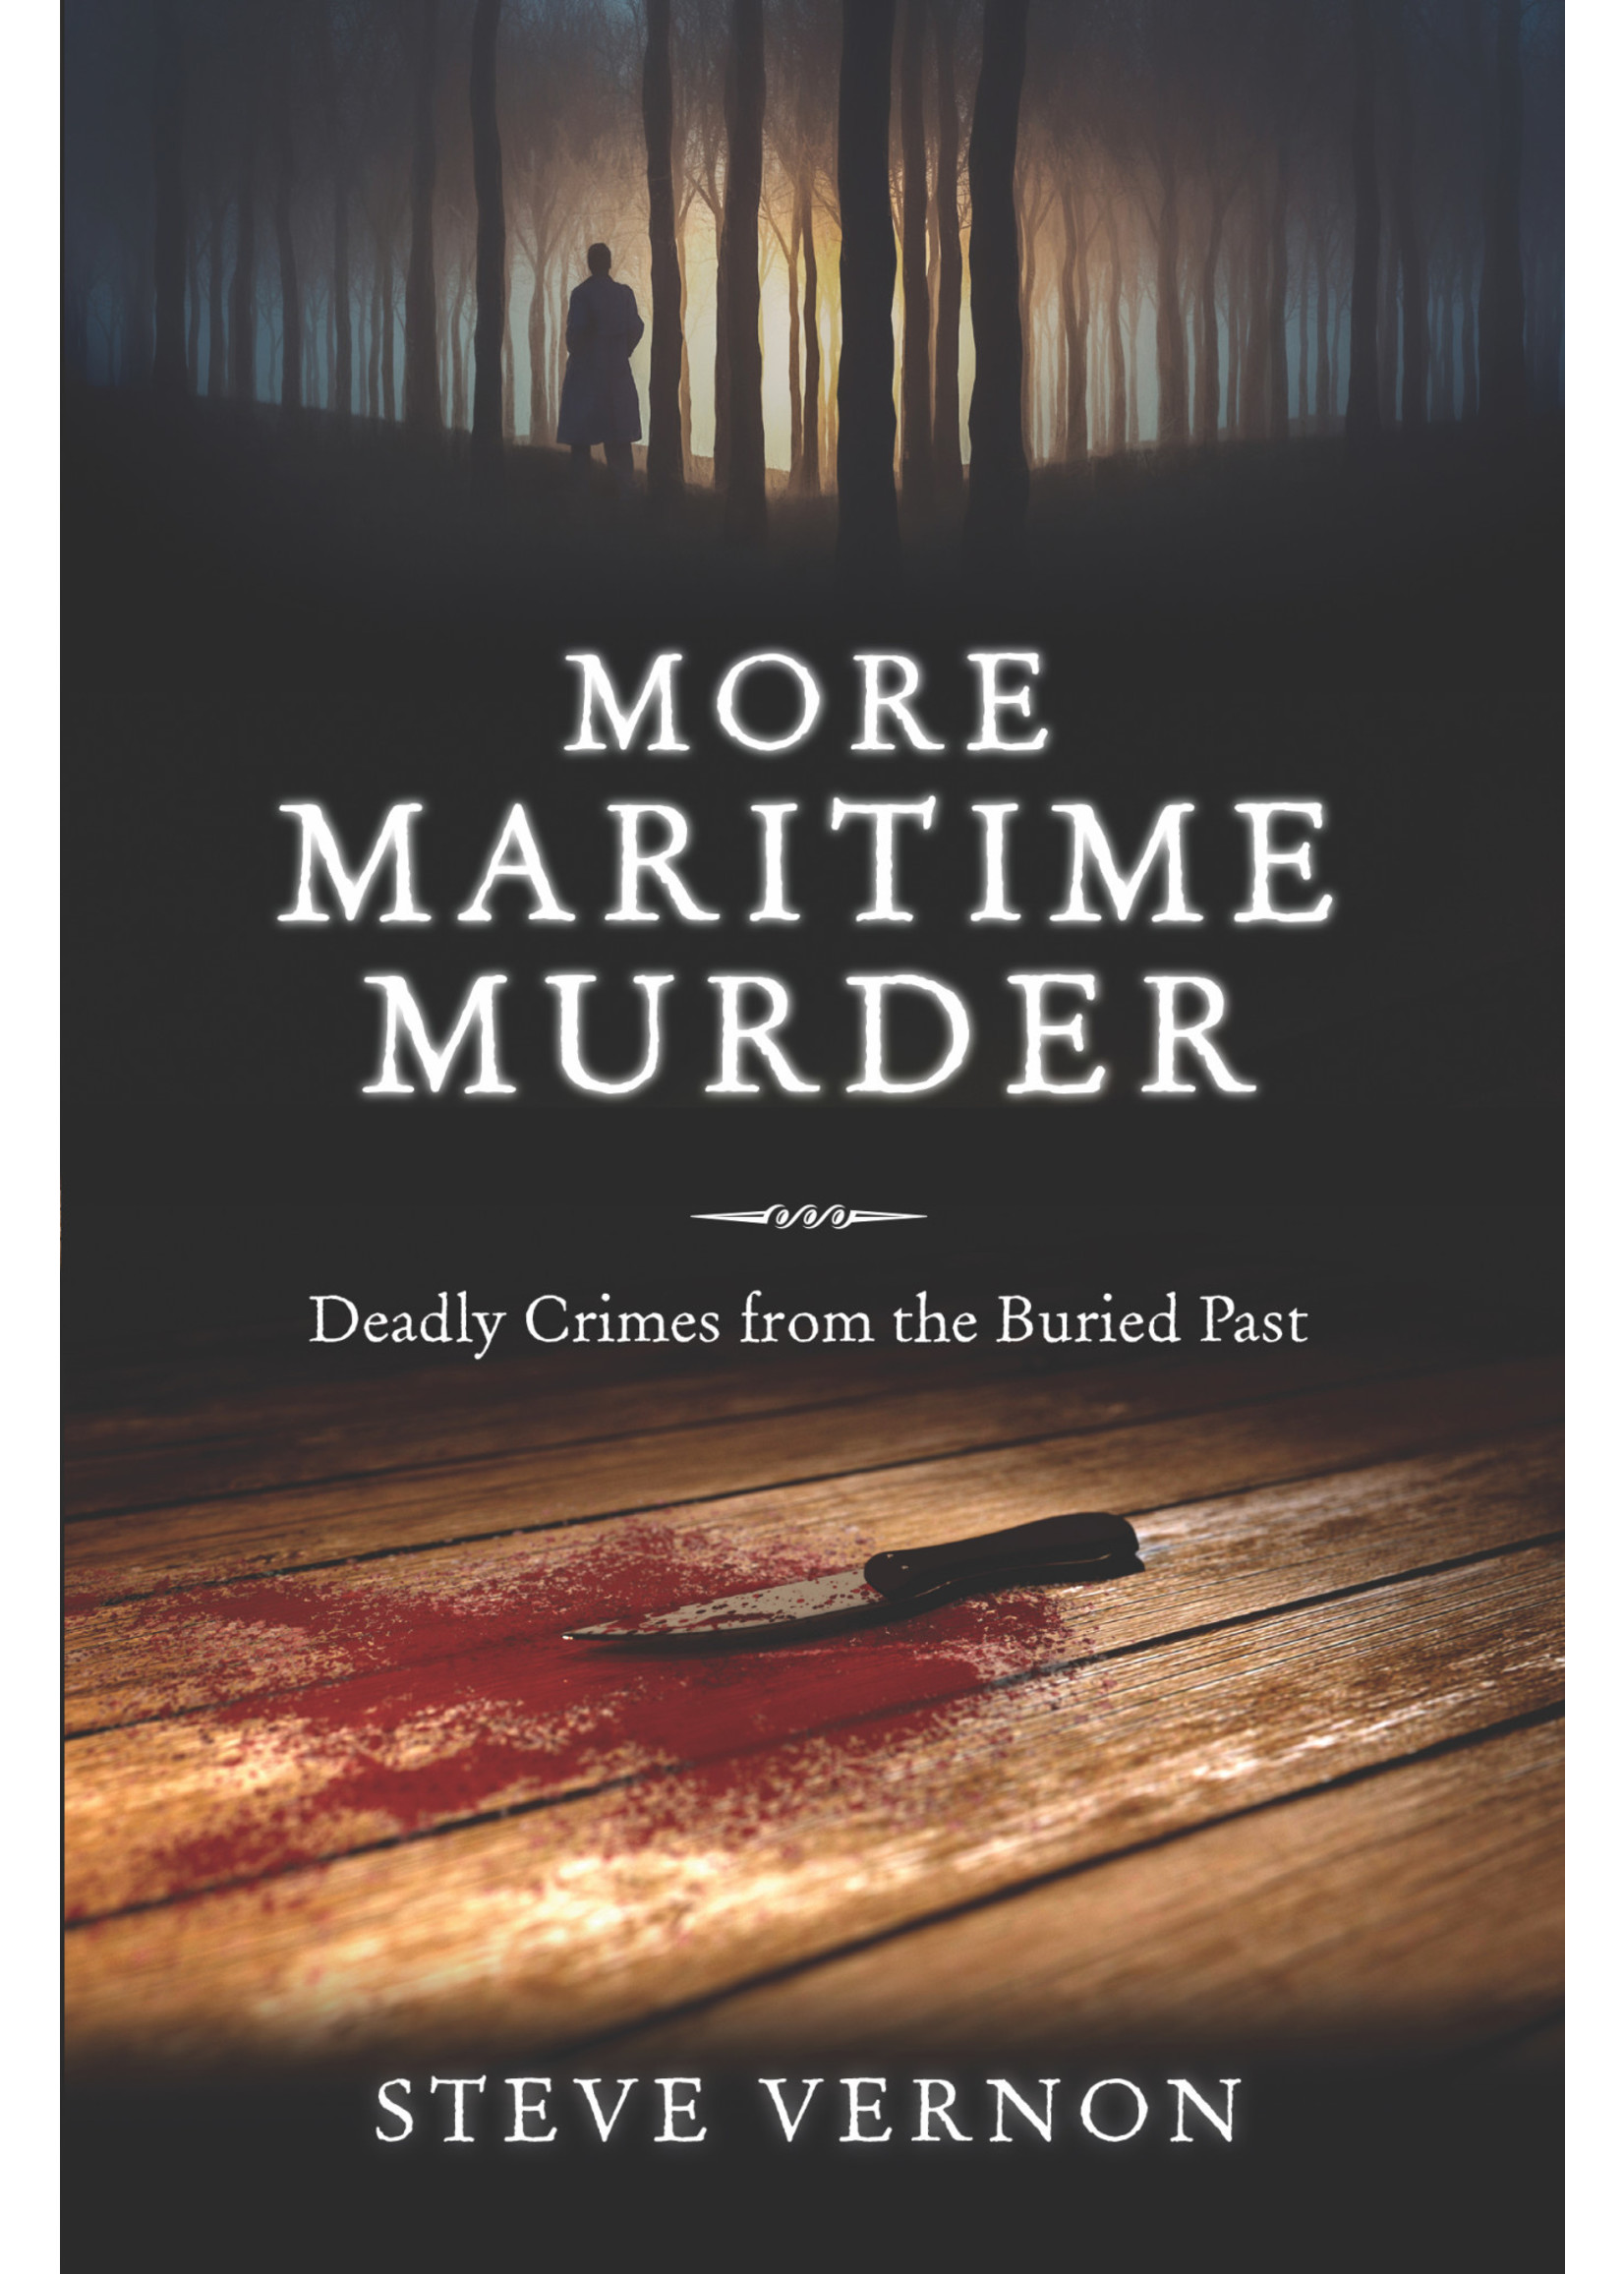 More Maritime Murder: Deadly Crimes of the Buried Past by Steve Vernon